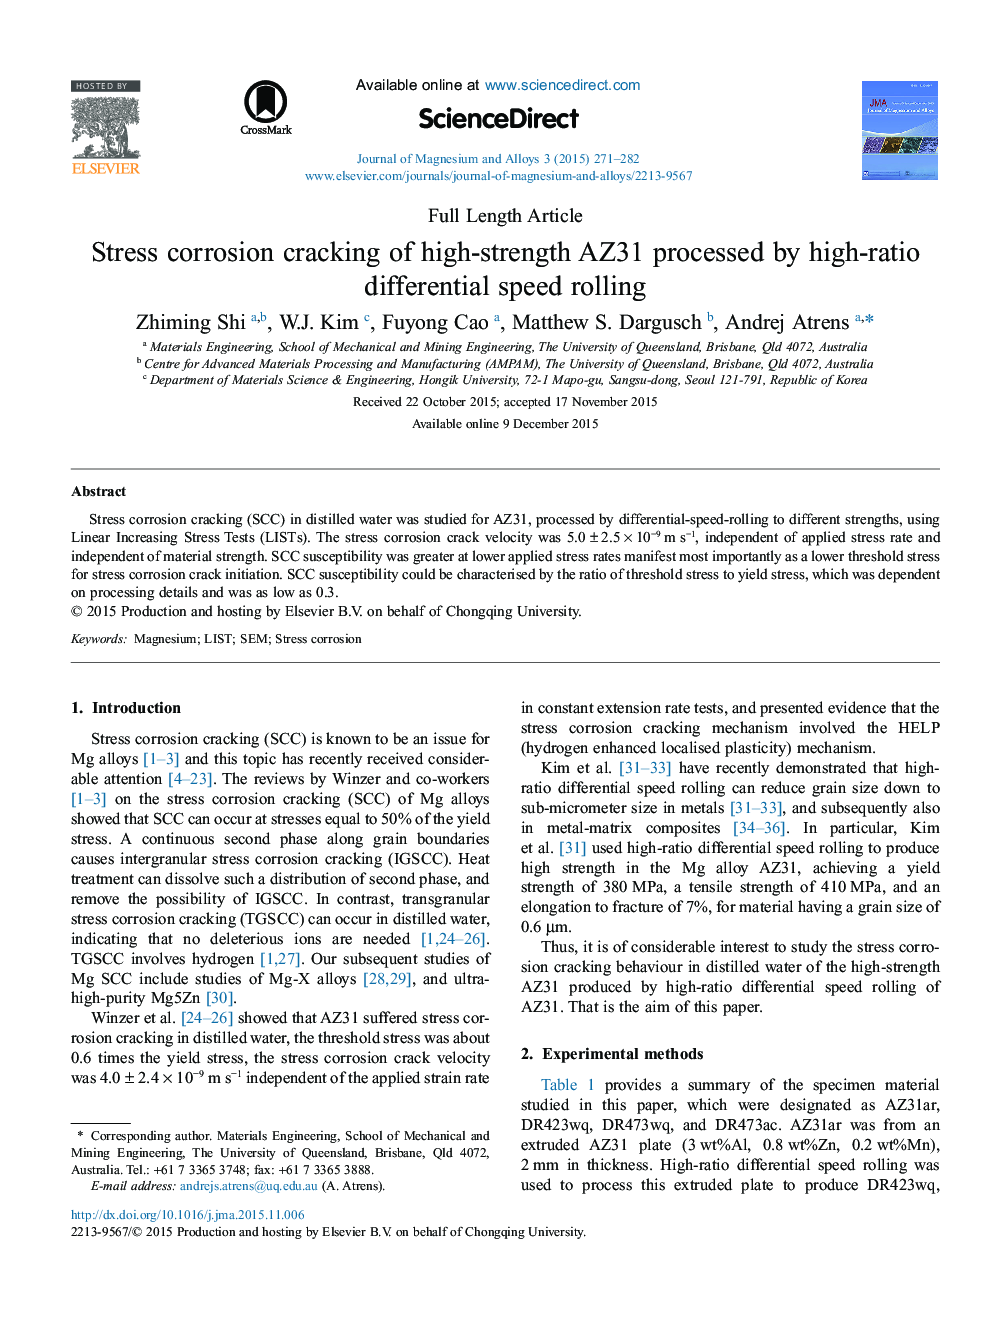 Stress corrosion cracking of high-strength AZ31 processed by high-ratio differential speed rolling